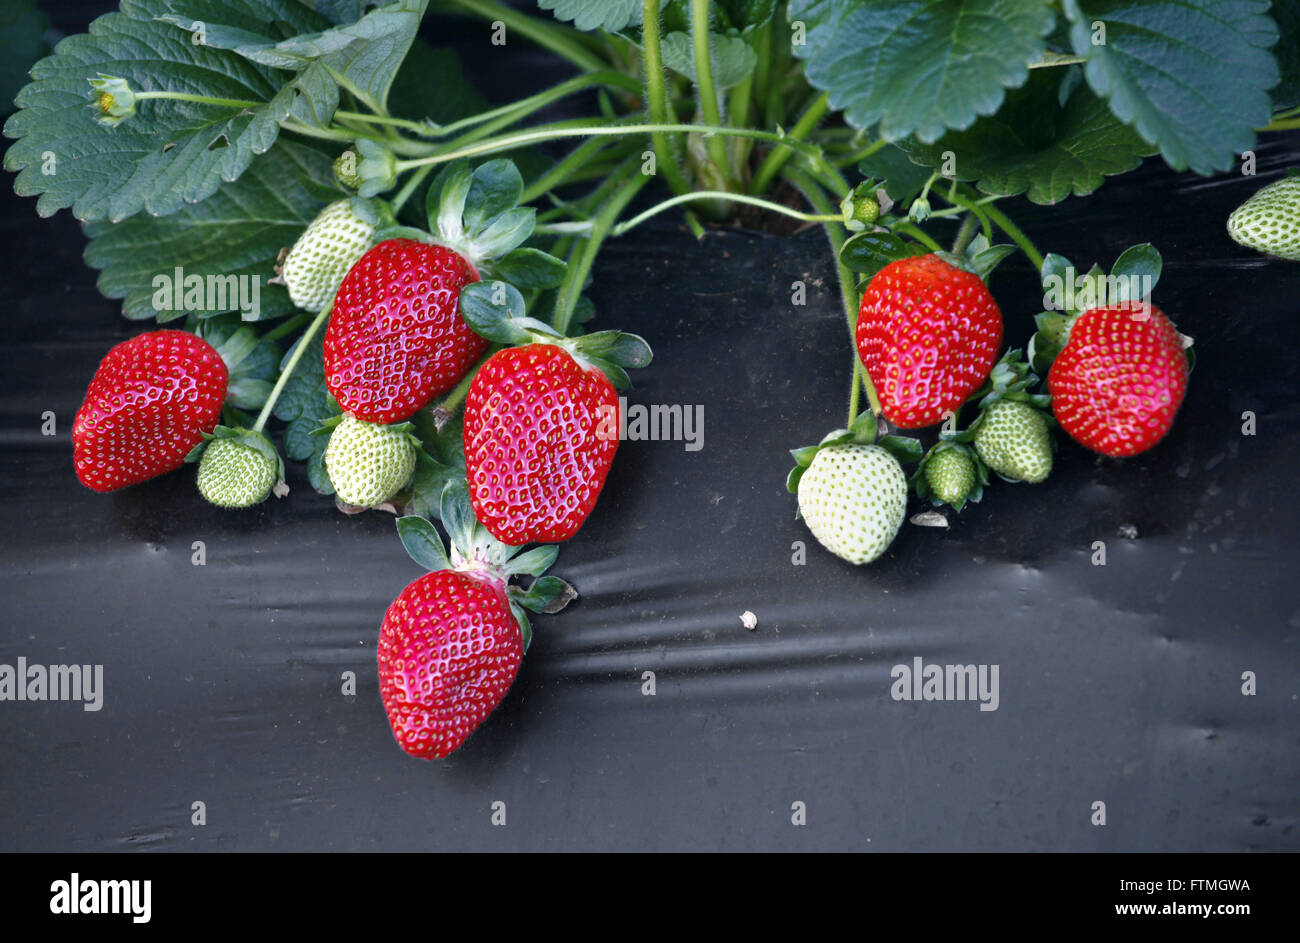 Detail plantation of strawberries in a rural town of Stowage Stock Photo